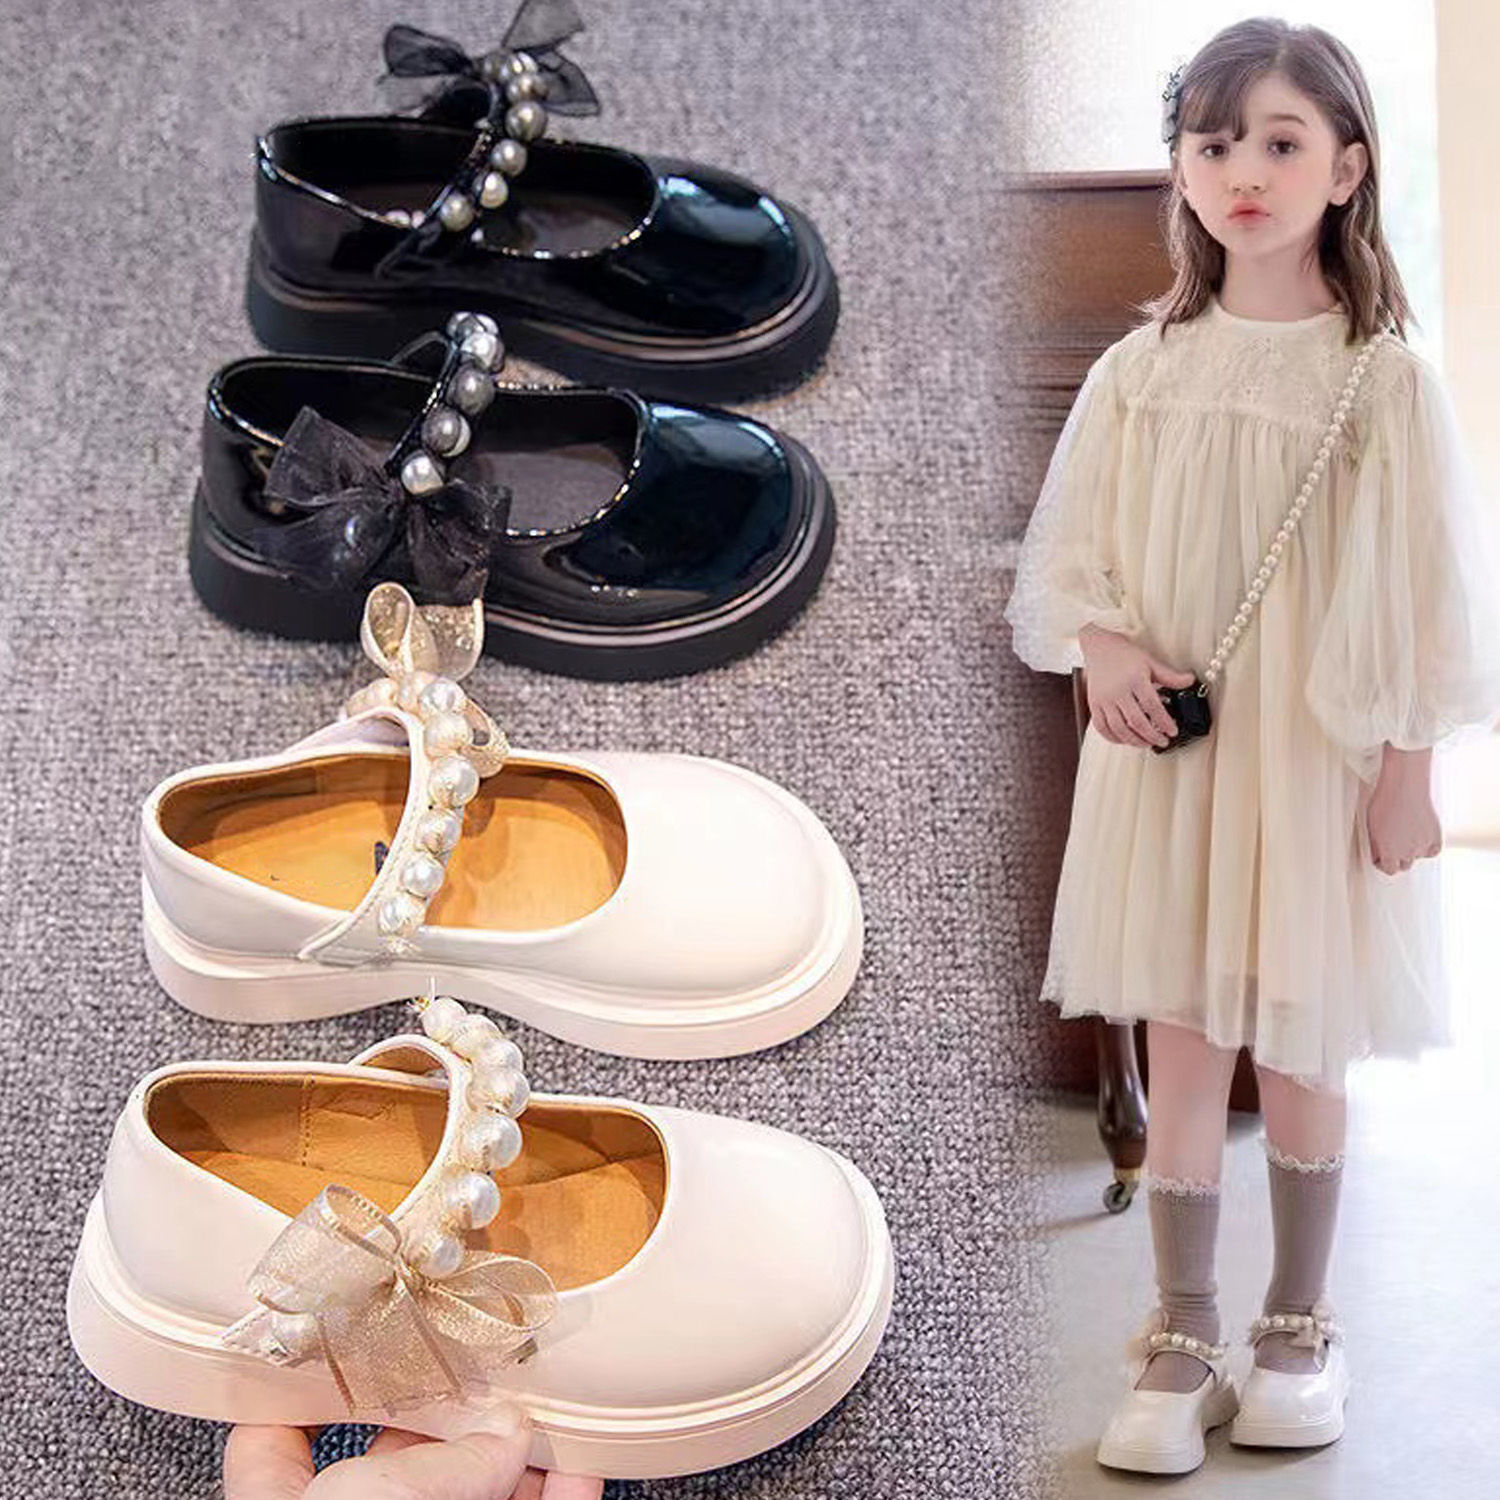 Small leather shoes girls princess shoes summer black single shoes Mary Jane shoes girls JK shoes soft bottom non-slip children's shoes